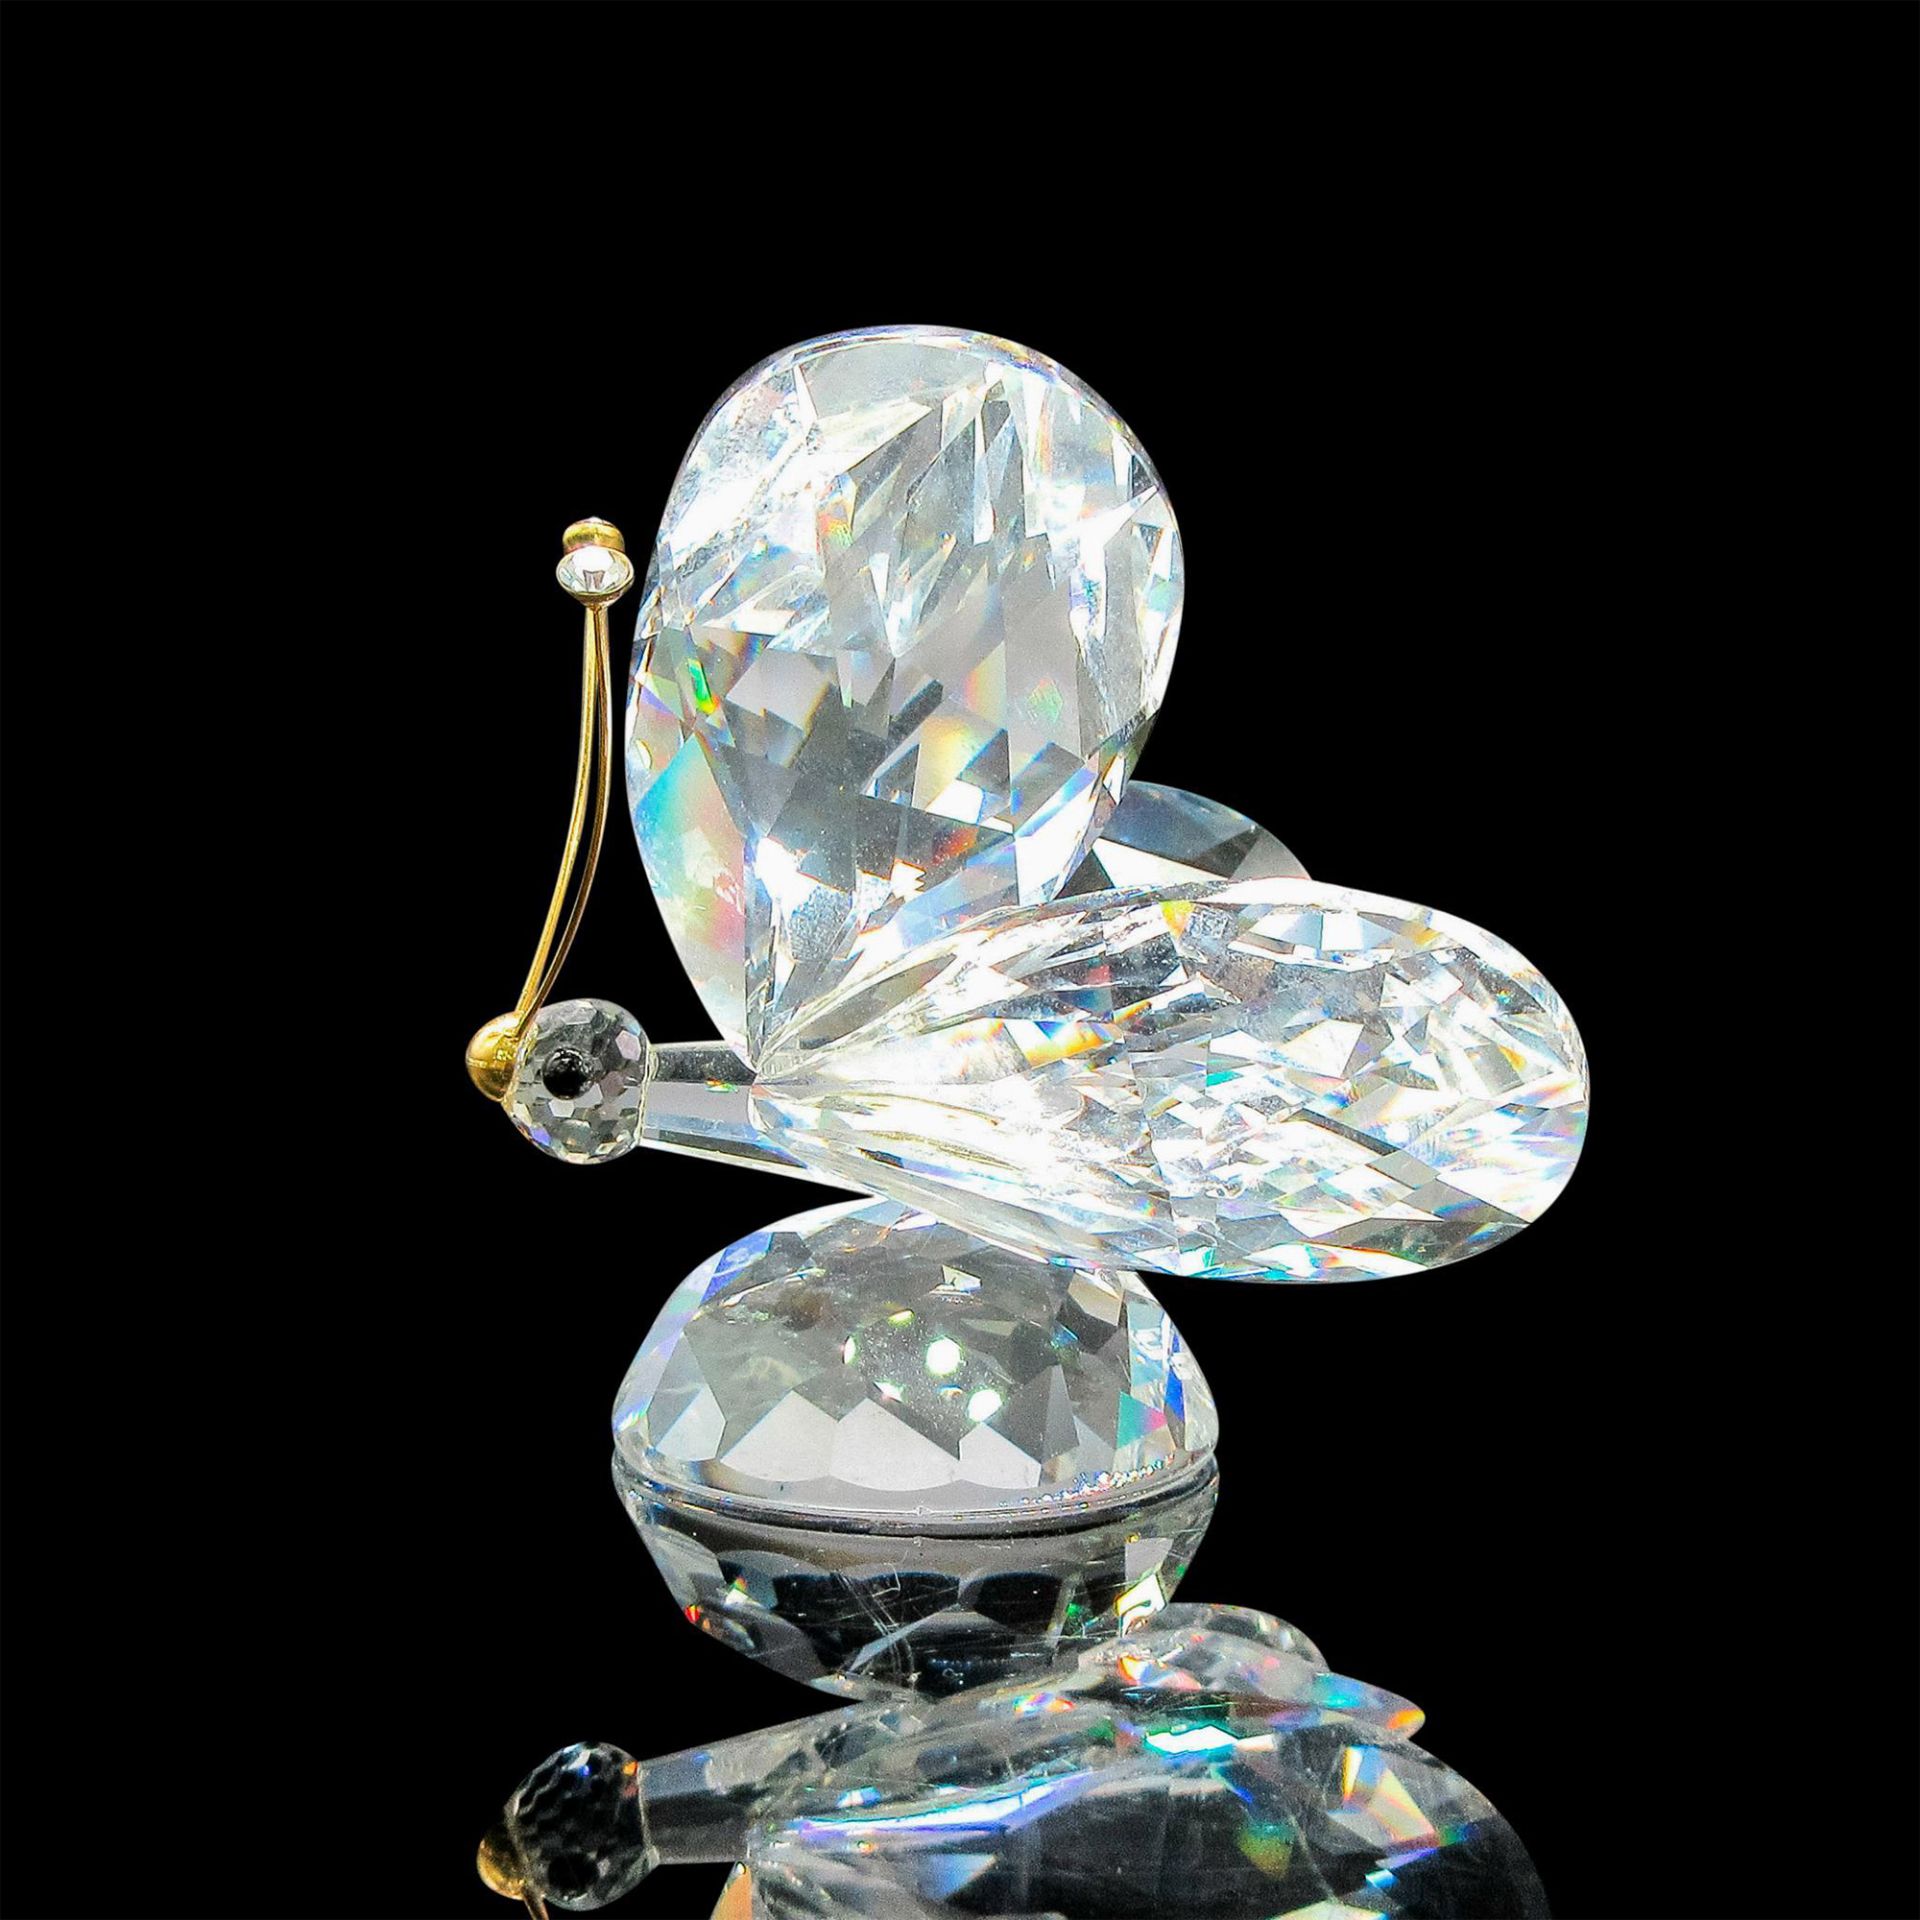 Swarovski Crystal Figurine, Butterfly with Gold Antennae - Image 2 of 4